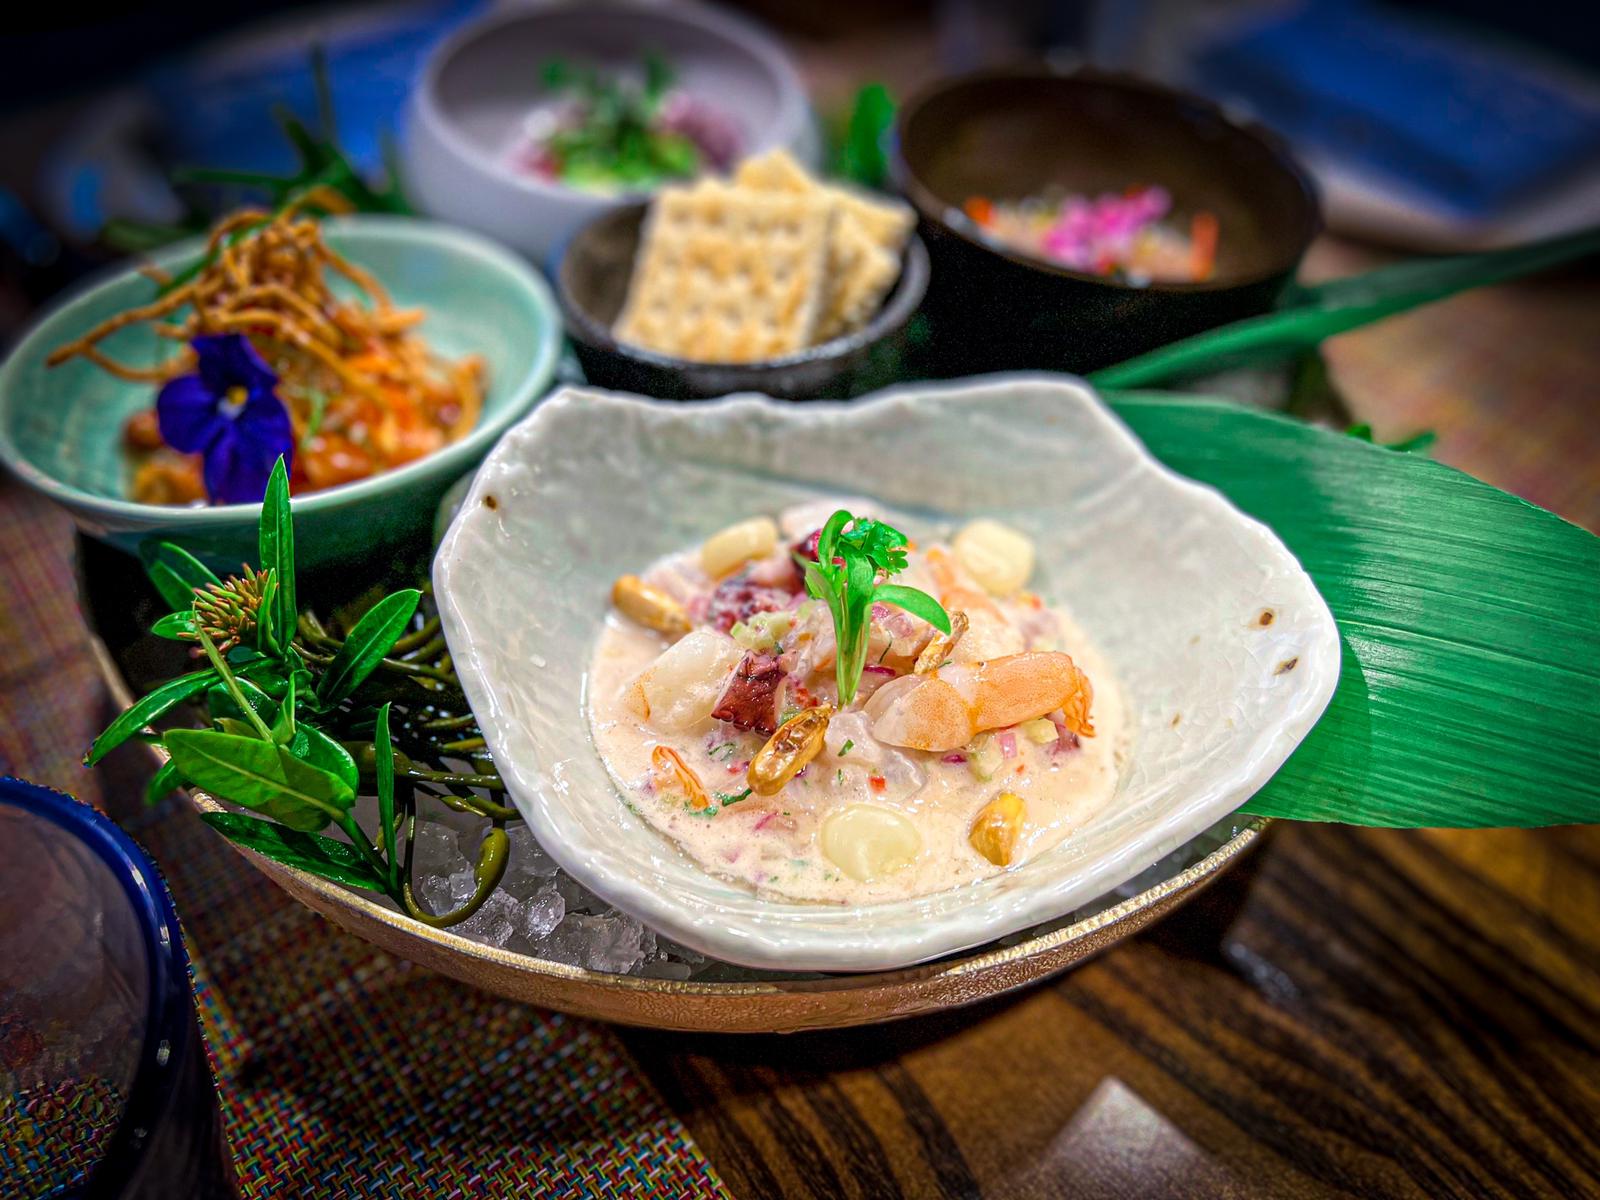 Celebrate Ceviche Day on June 28 at South Florida Concepts